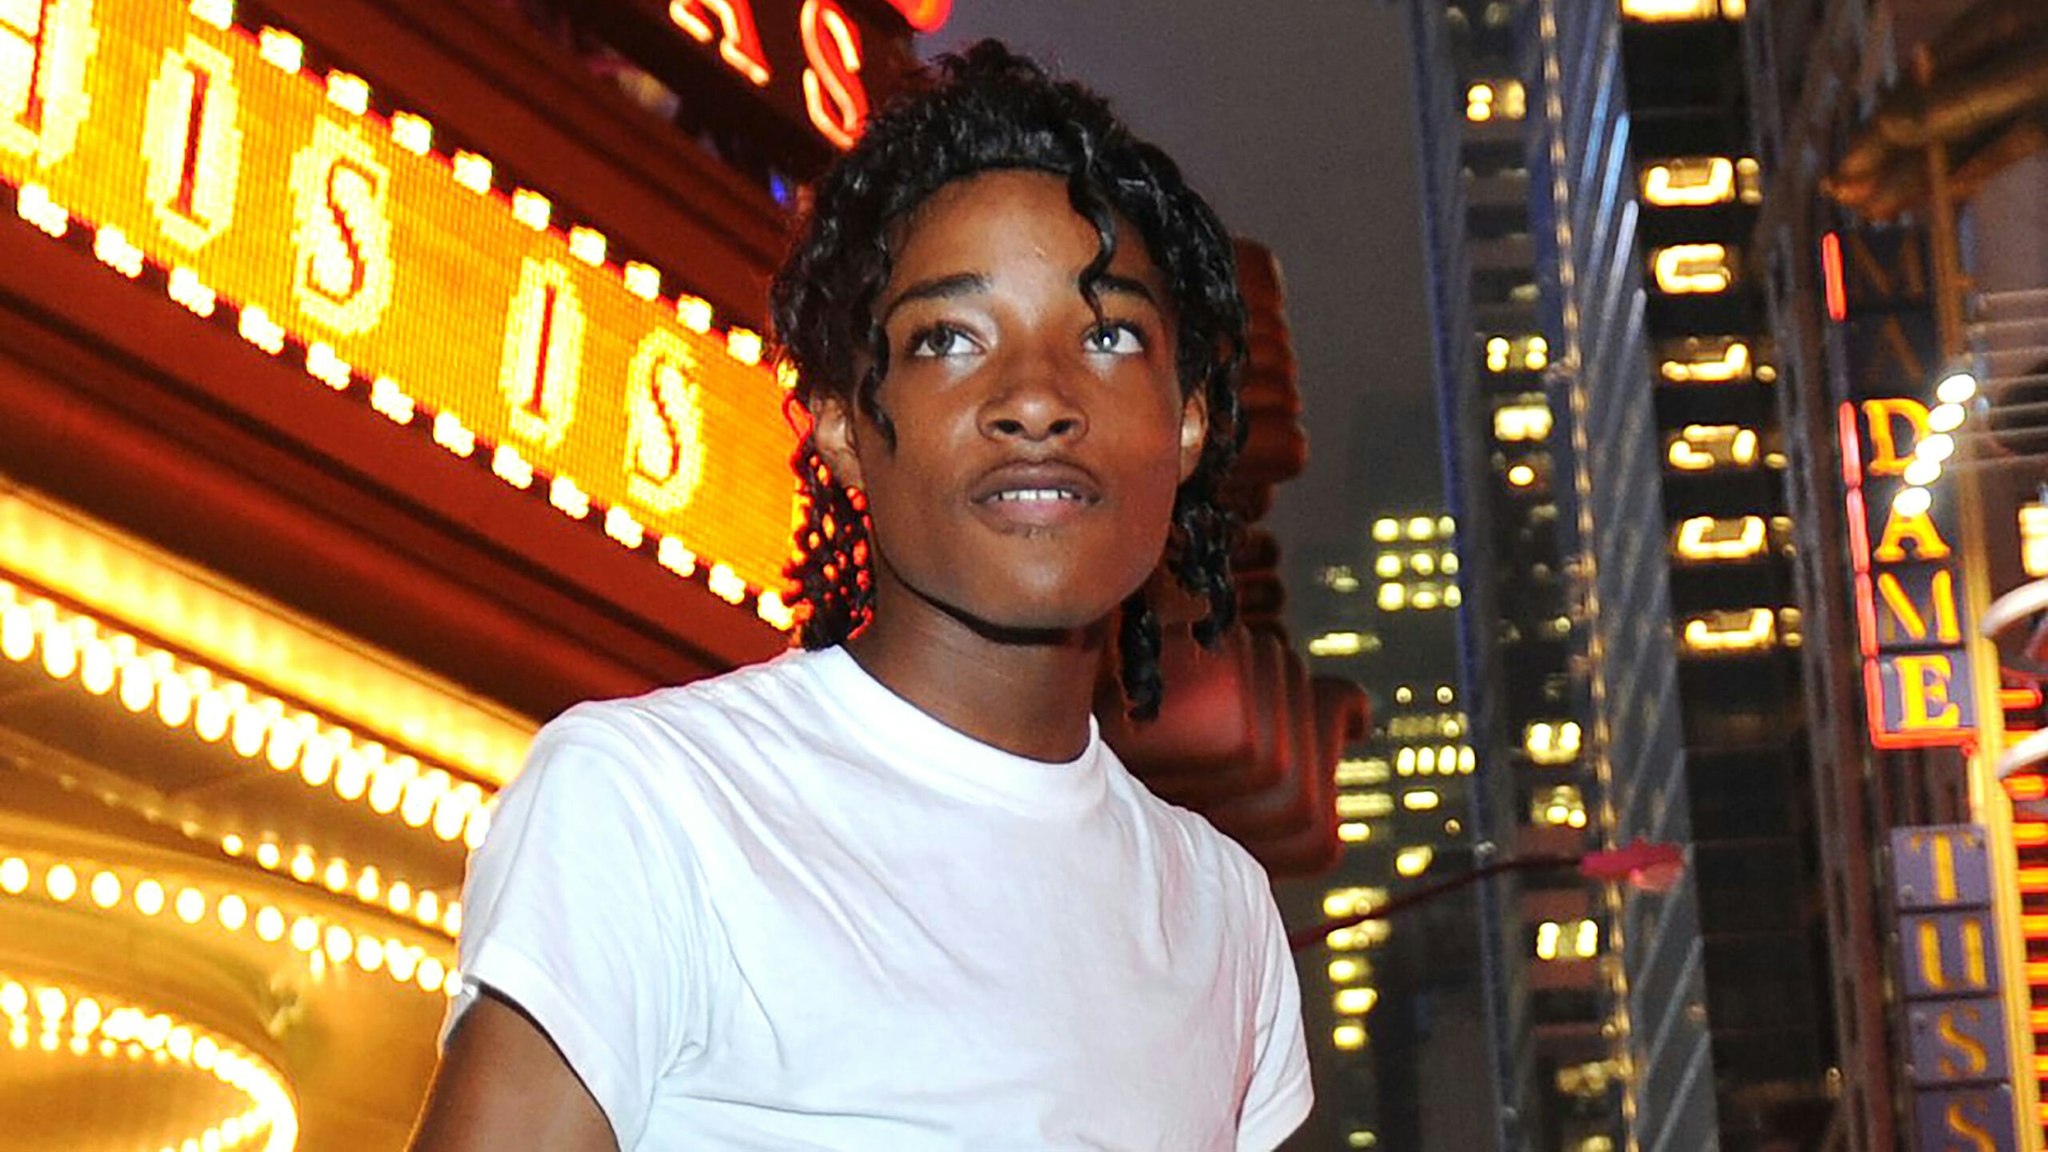 Jordan Neely is pictured before going to see the Michael Jackson movie, &quot;This is It,&quot; outside the Regal Cinemas on 8th Ave. and 42nd St. in Times Square, New York, in 2009.